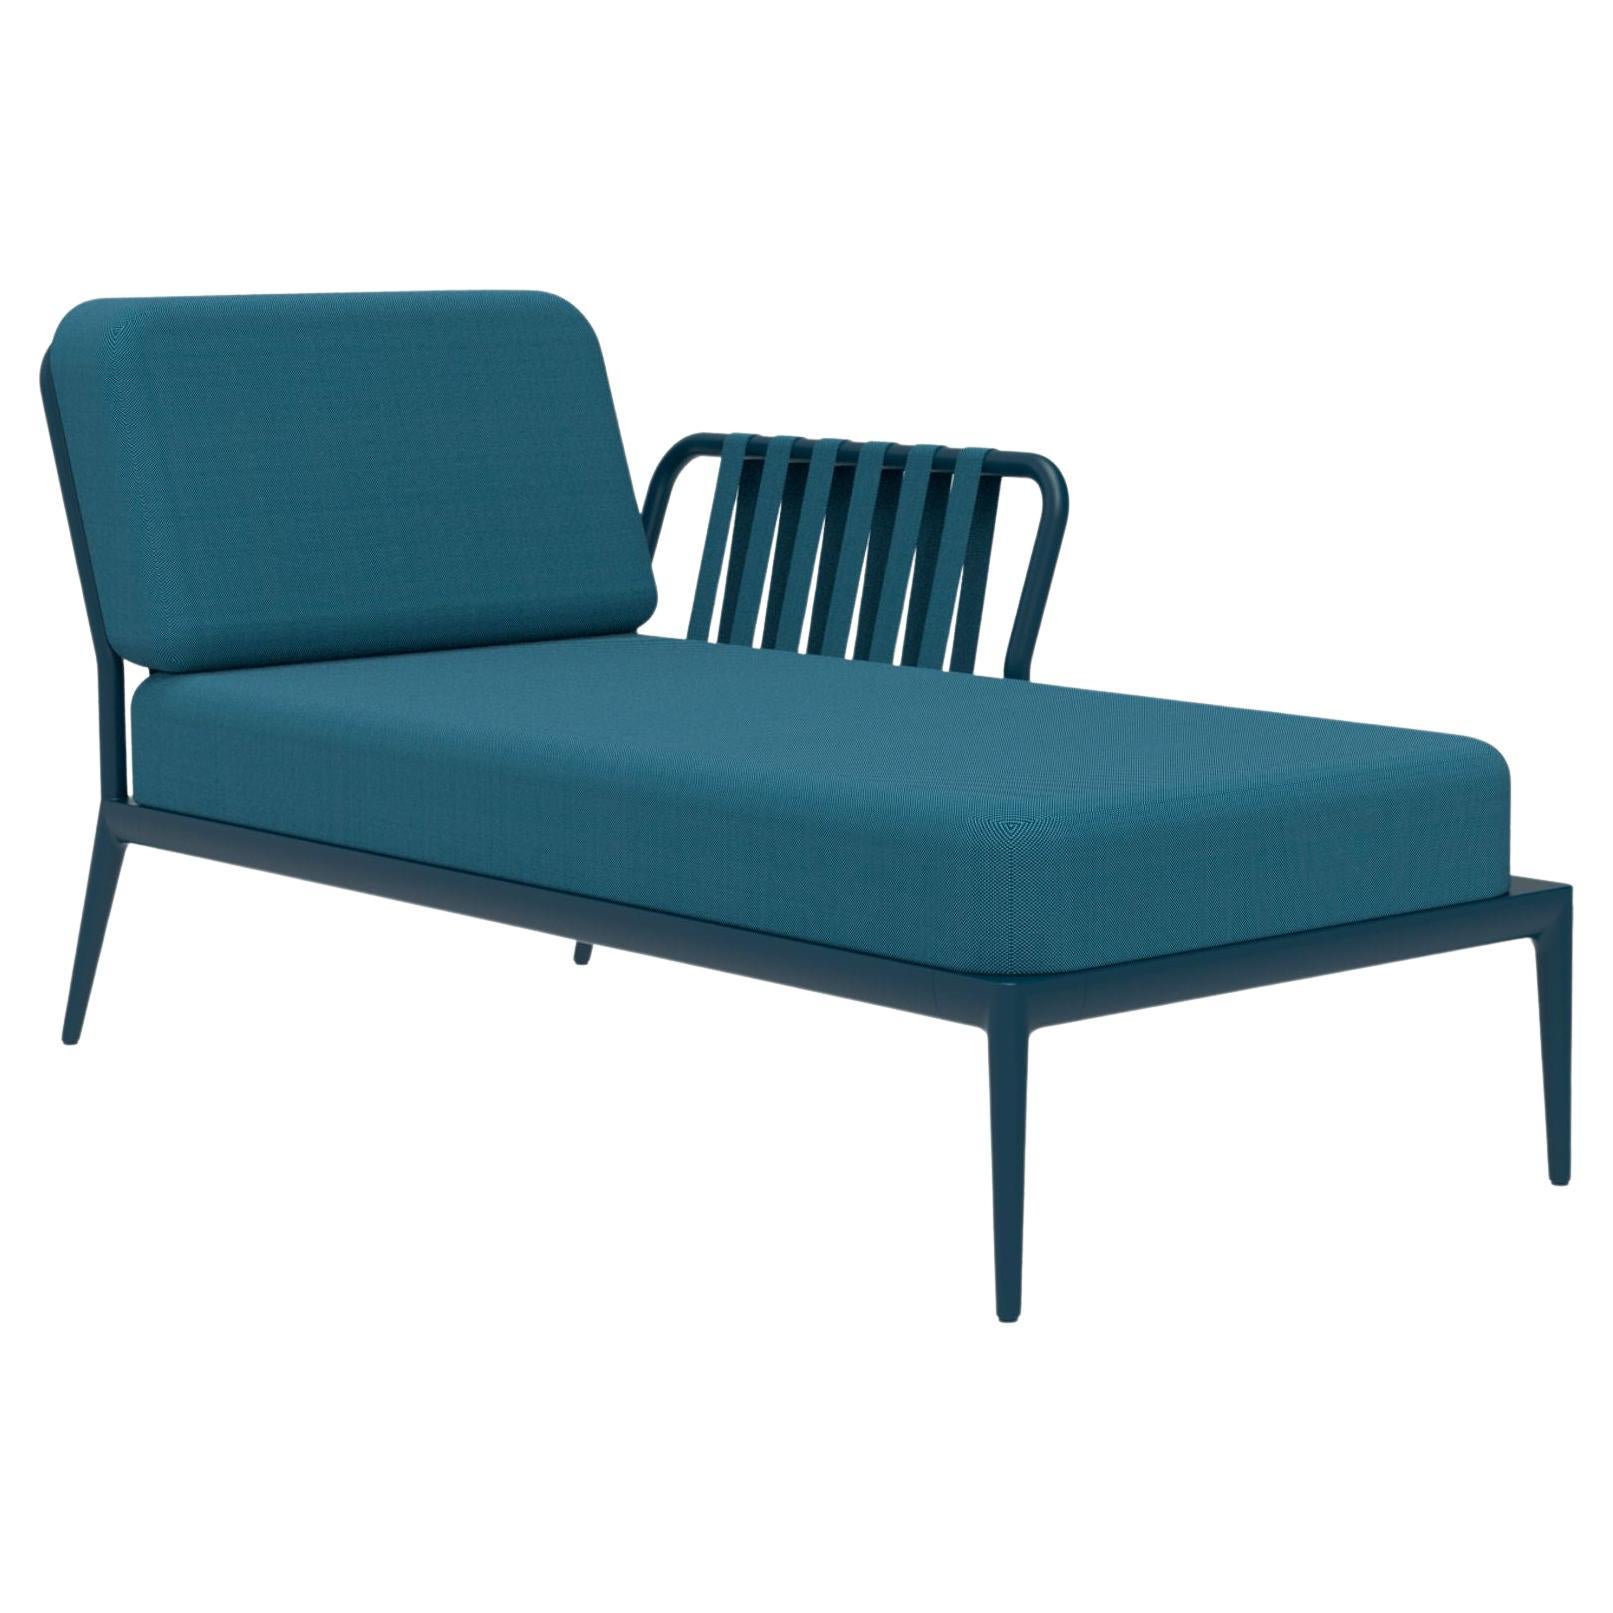 Ribbons Navy Left Chaise Lounge by Mowee For Sale